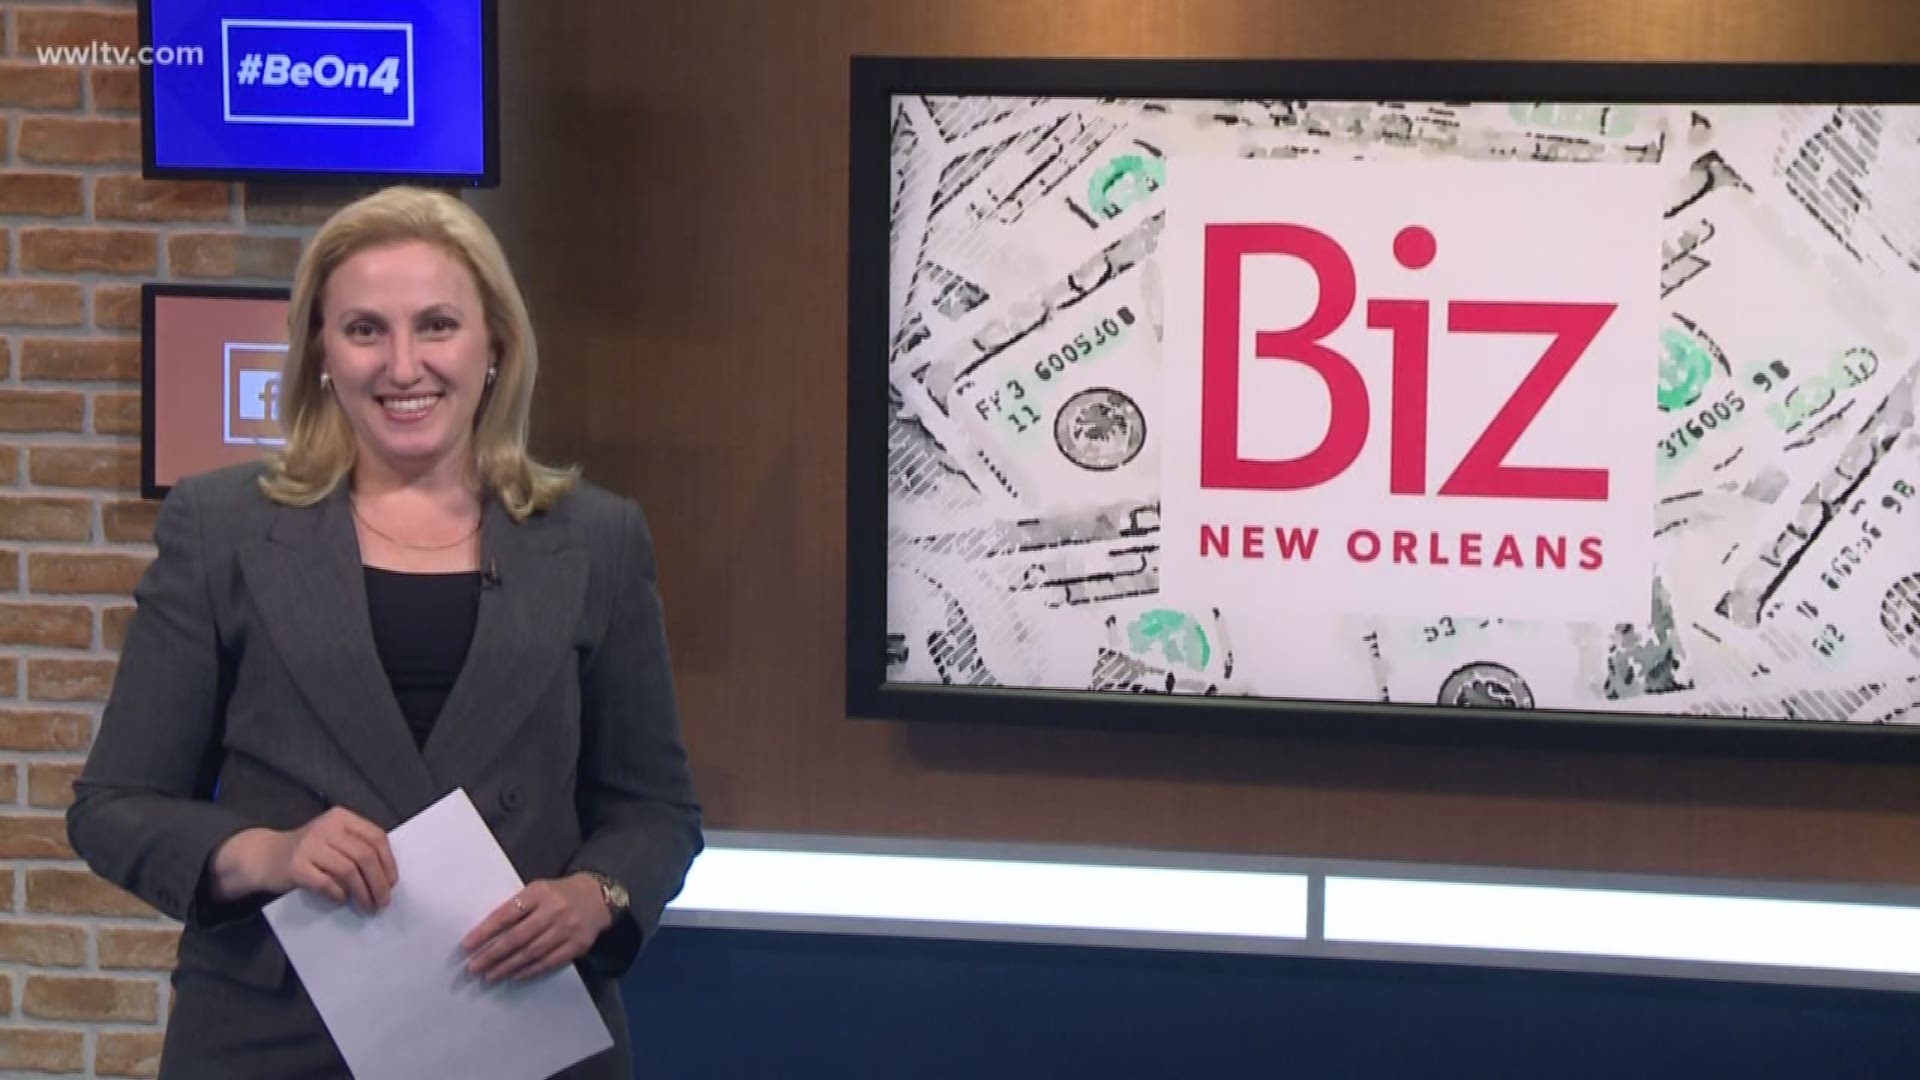 The real estate market is tight, especially for first time homebuyers looking for a move-in ready property at entry-level prices. BizNewOrleans.com's Leslie Snadowsky says you may benefit from a special type of mortgage that can help finance your house and the cost to renovate it.